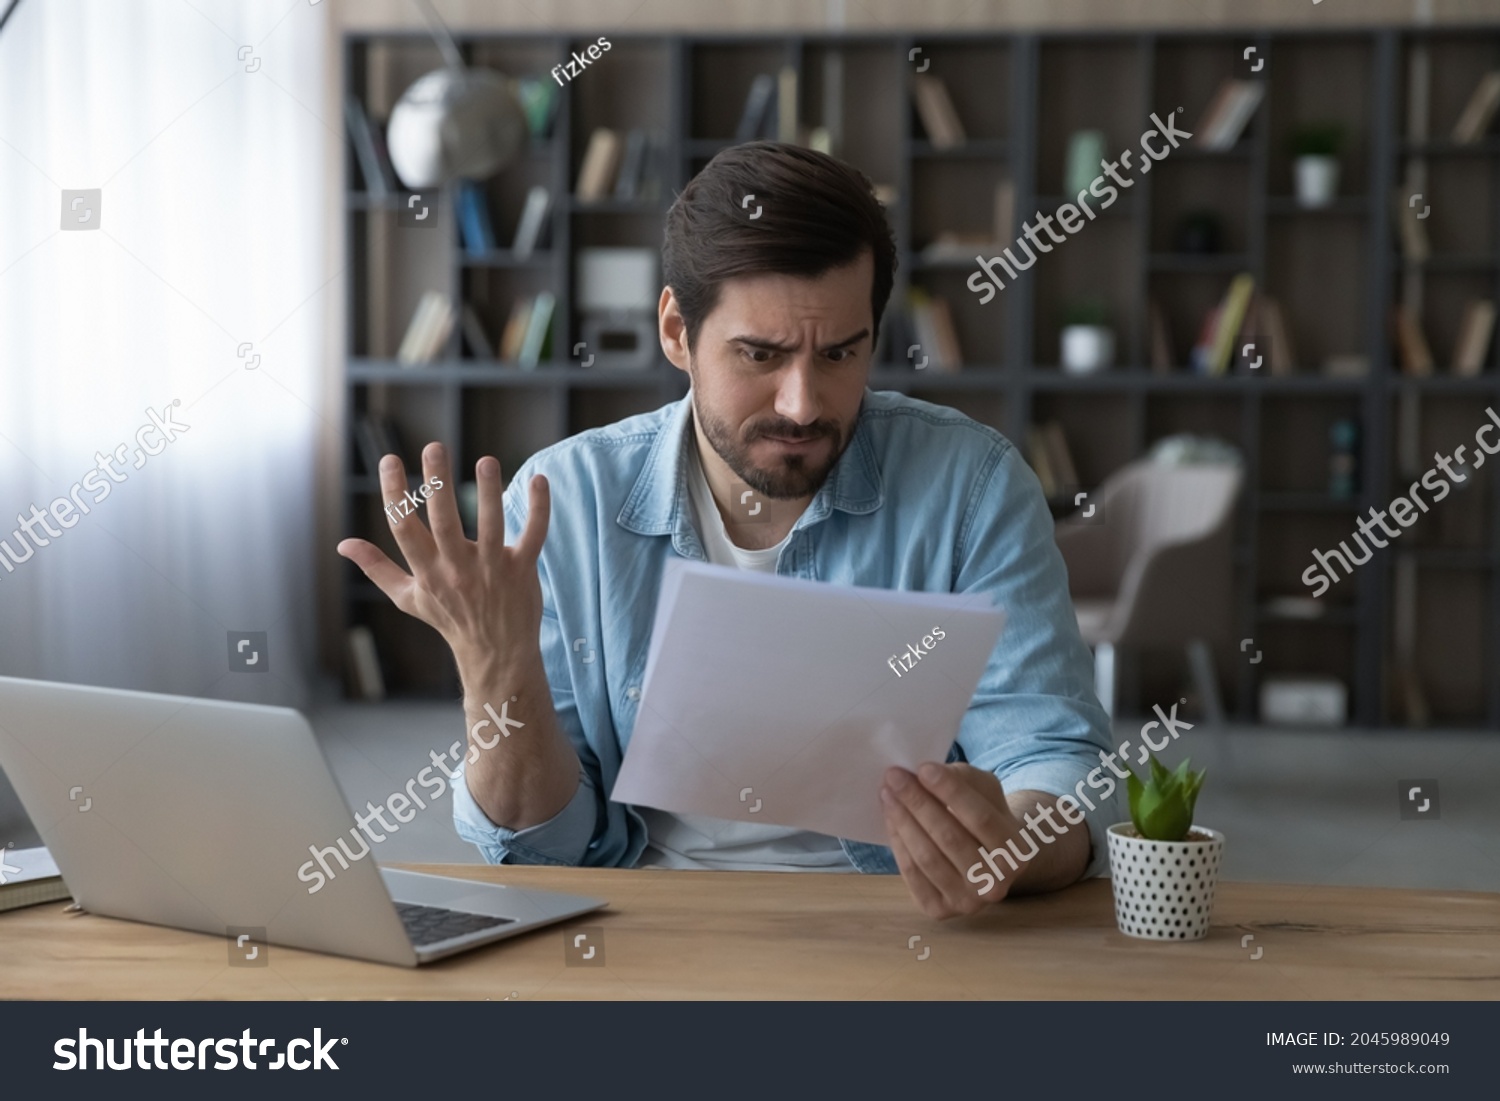 Unhappy man received bad unexpected news in letter, having problem with bank, eviction or dismissal, notice, loss money or debt, shocked businessman reading notification, working with correspondence #2045989049